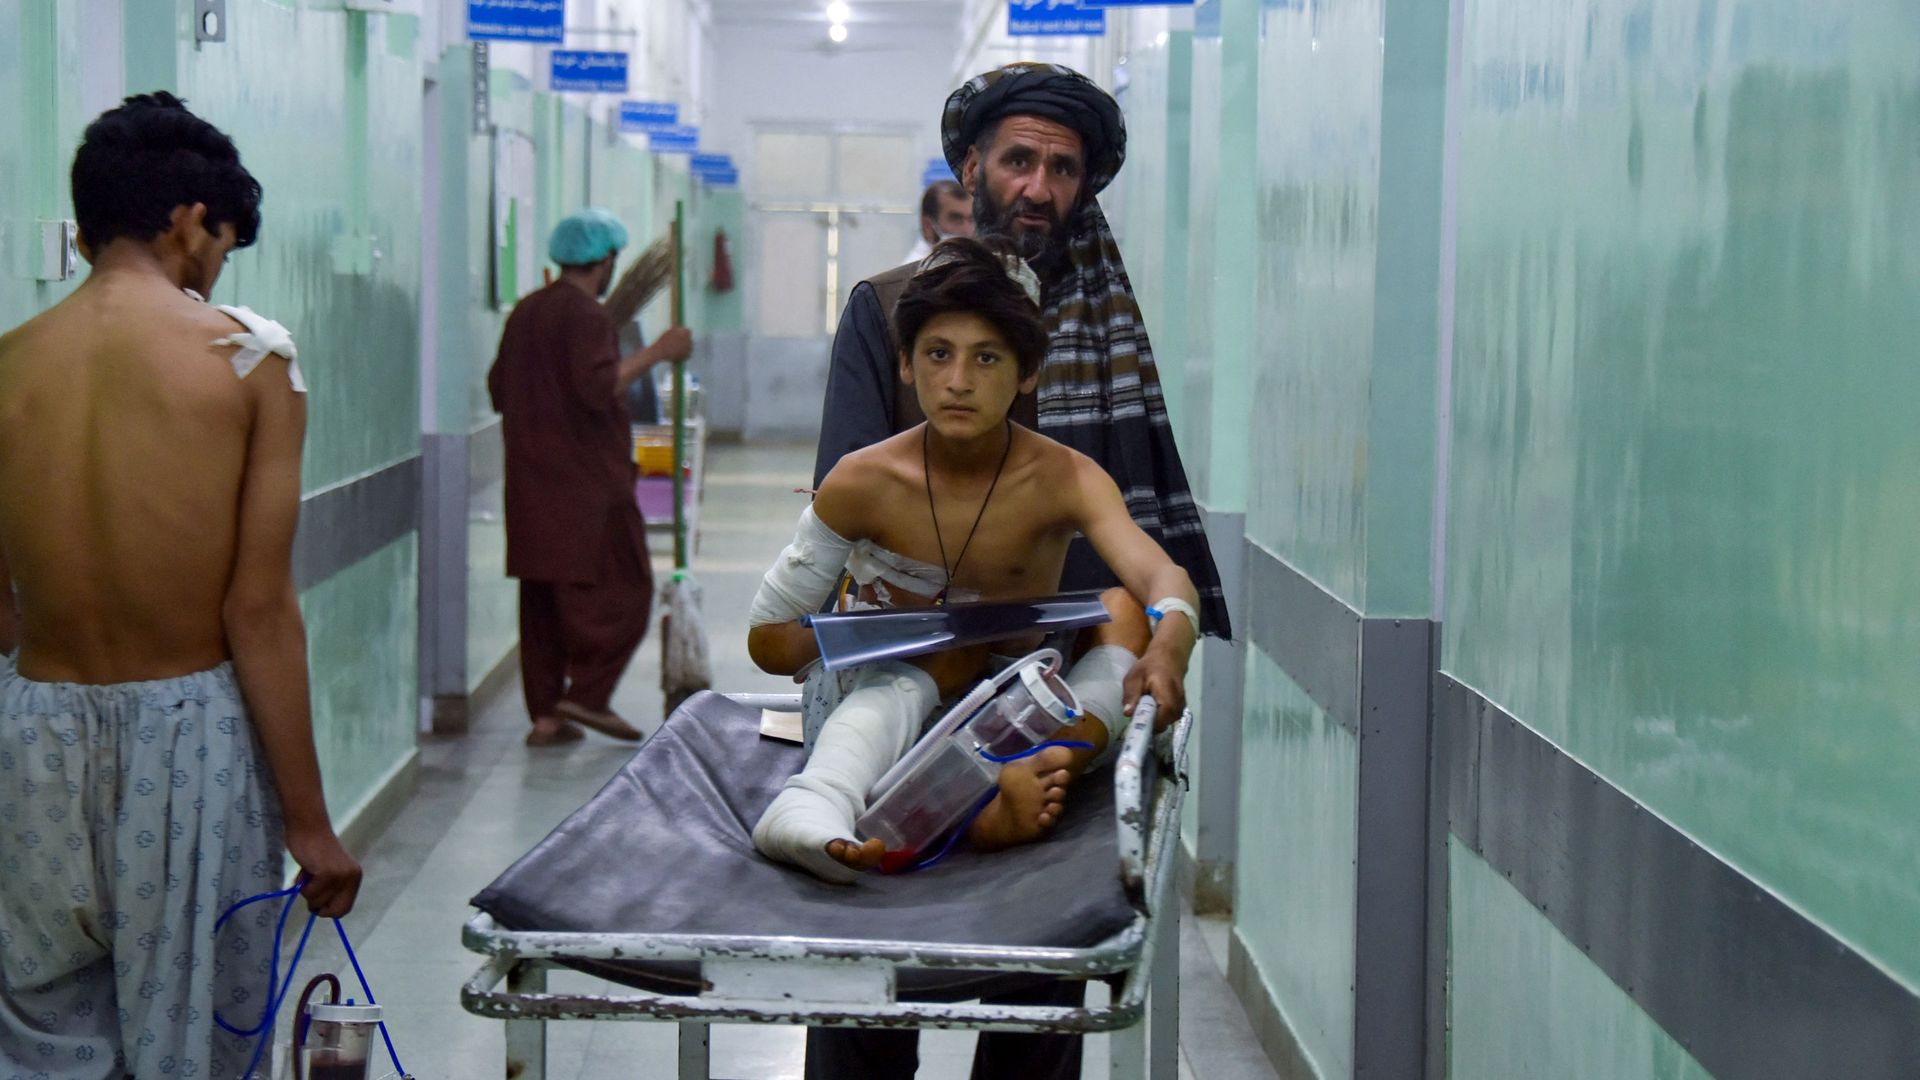  A man pushes an injured boy on a stretcher along a hospital corridor in Kandahar on May 10